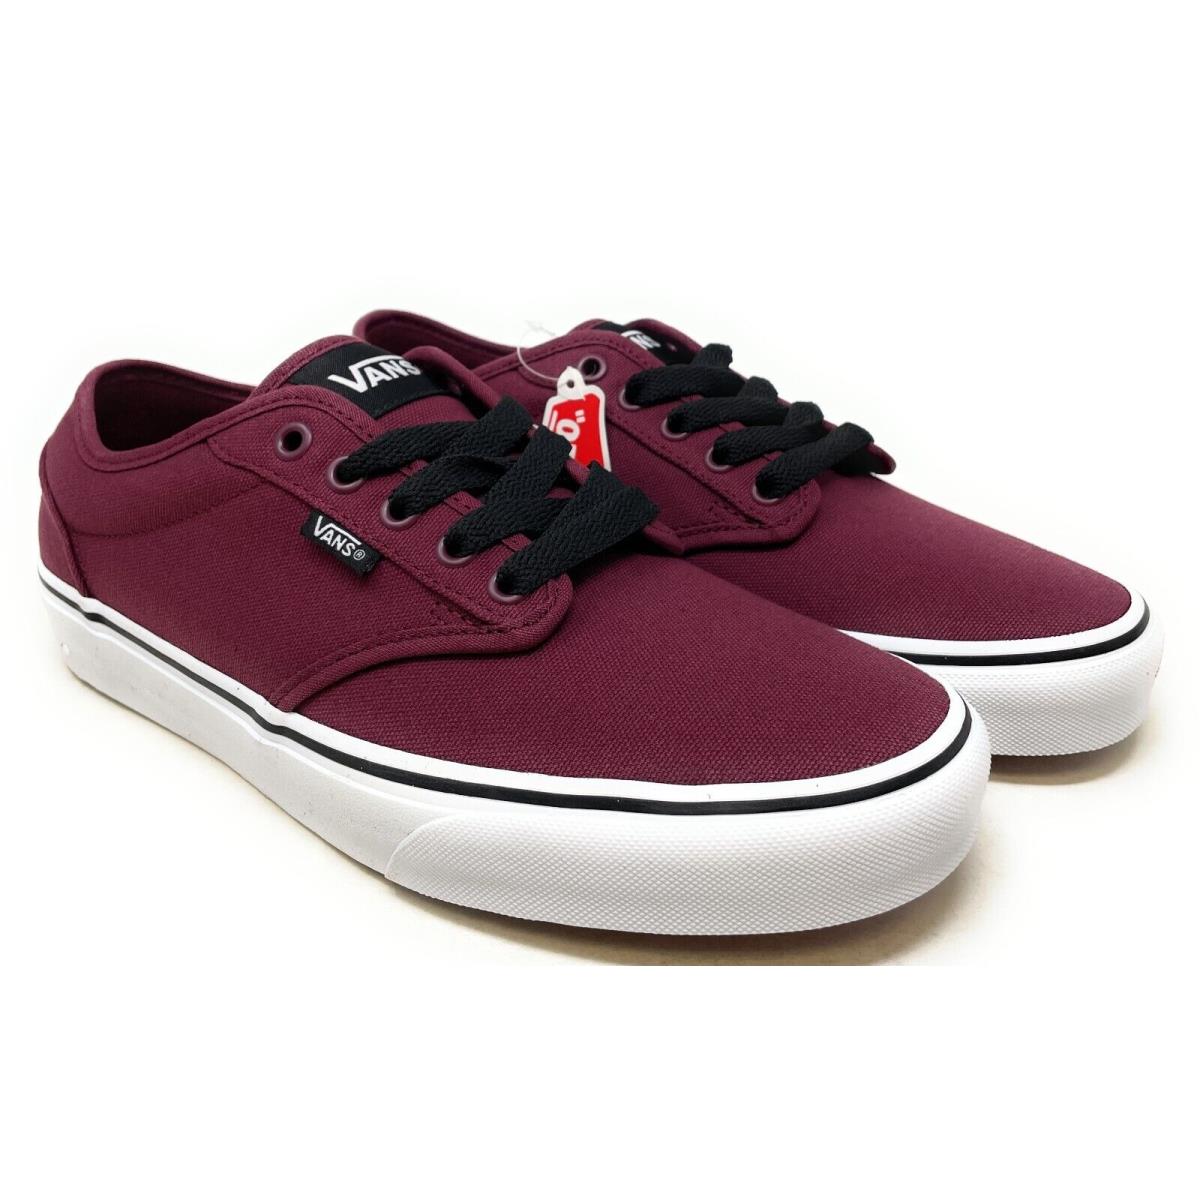 Vans Mens Atwood Skateboarding Shoes Canvas Oxblood/white